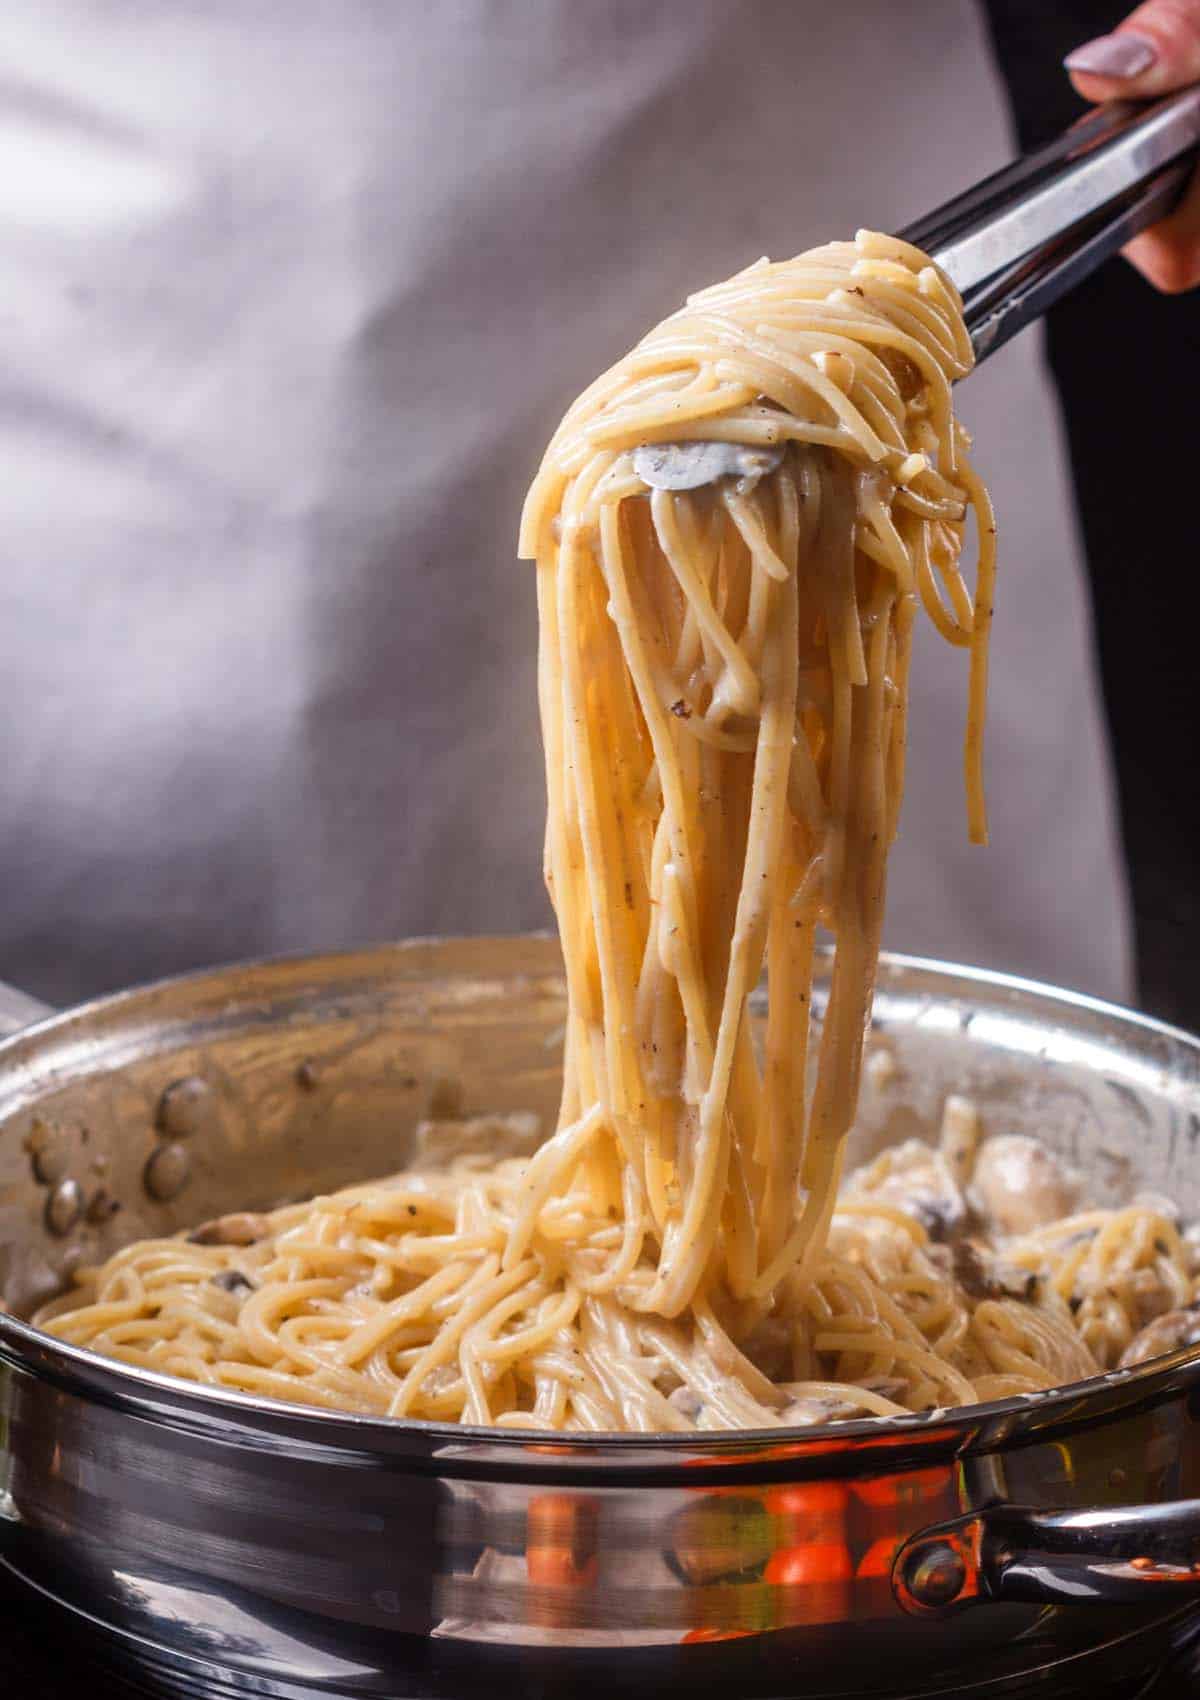 I believe that the sauce and the pasta should become one! After boiling your pasta al dente, I recommend adding it directly to the saucepan with your desired sauce.